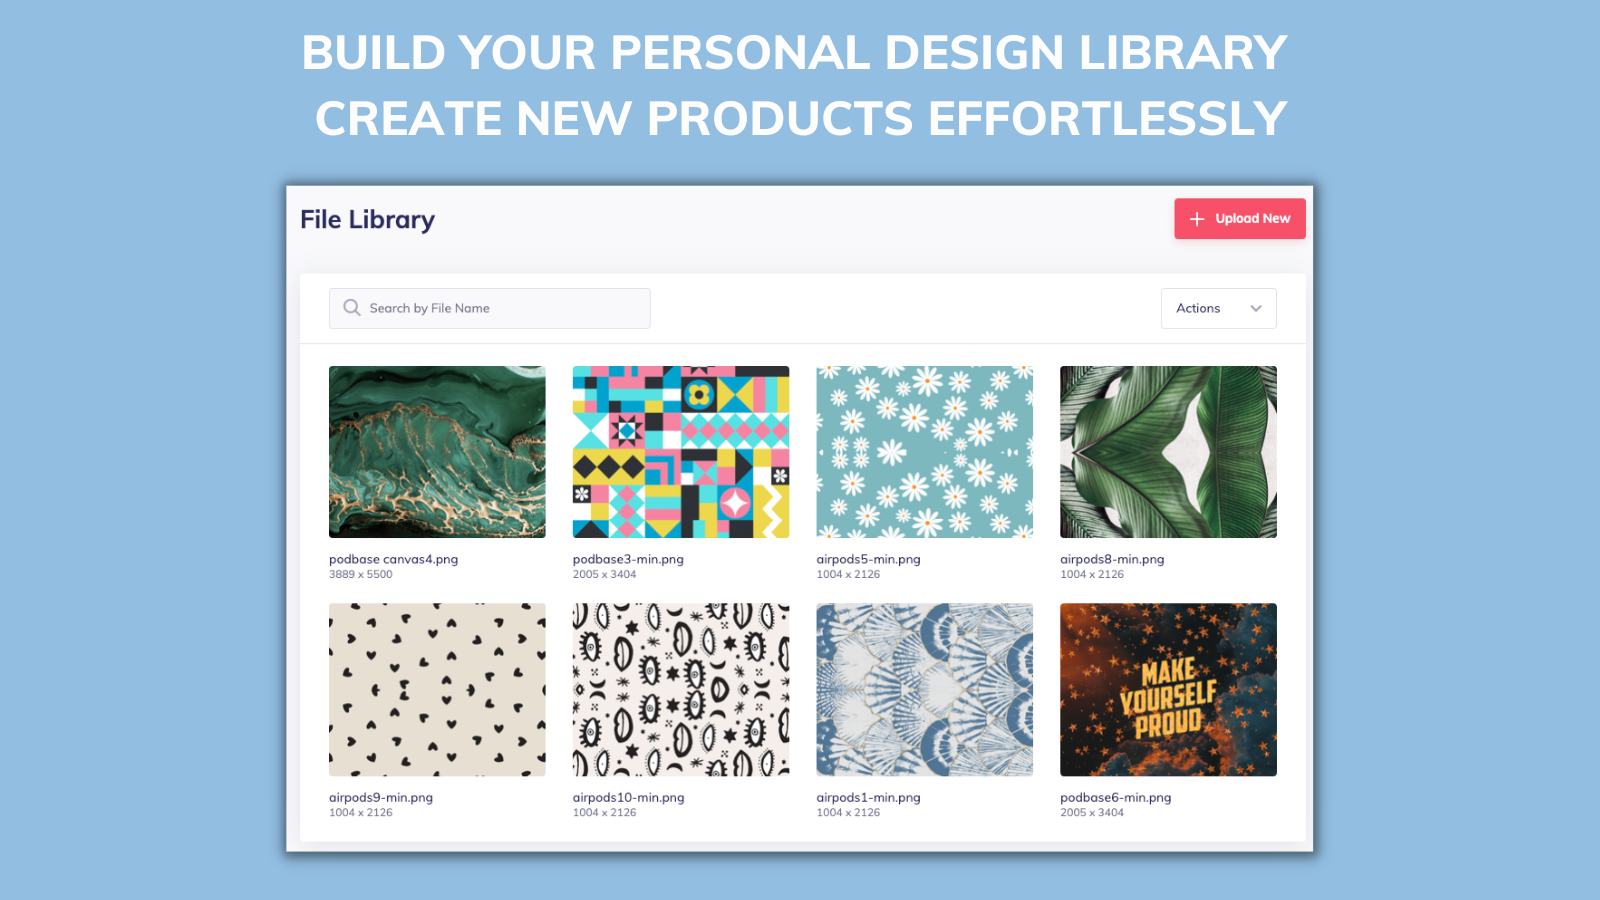 Build your personal design library and create new products.